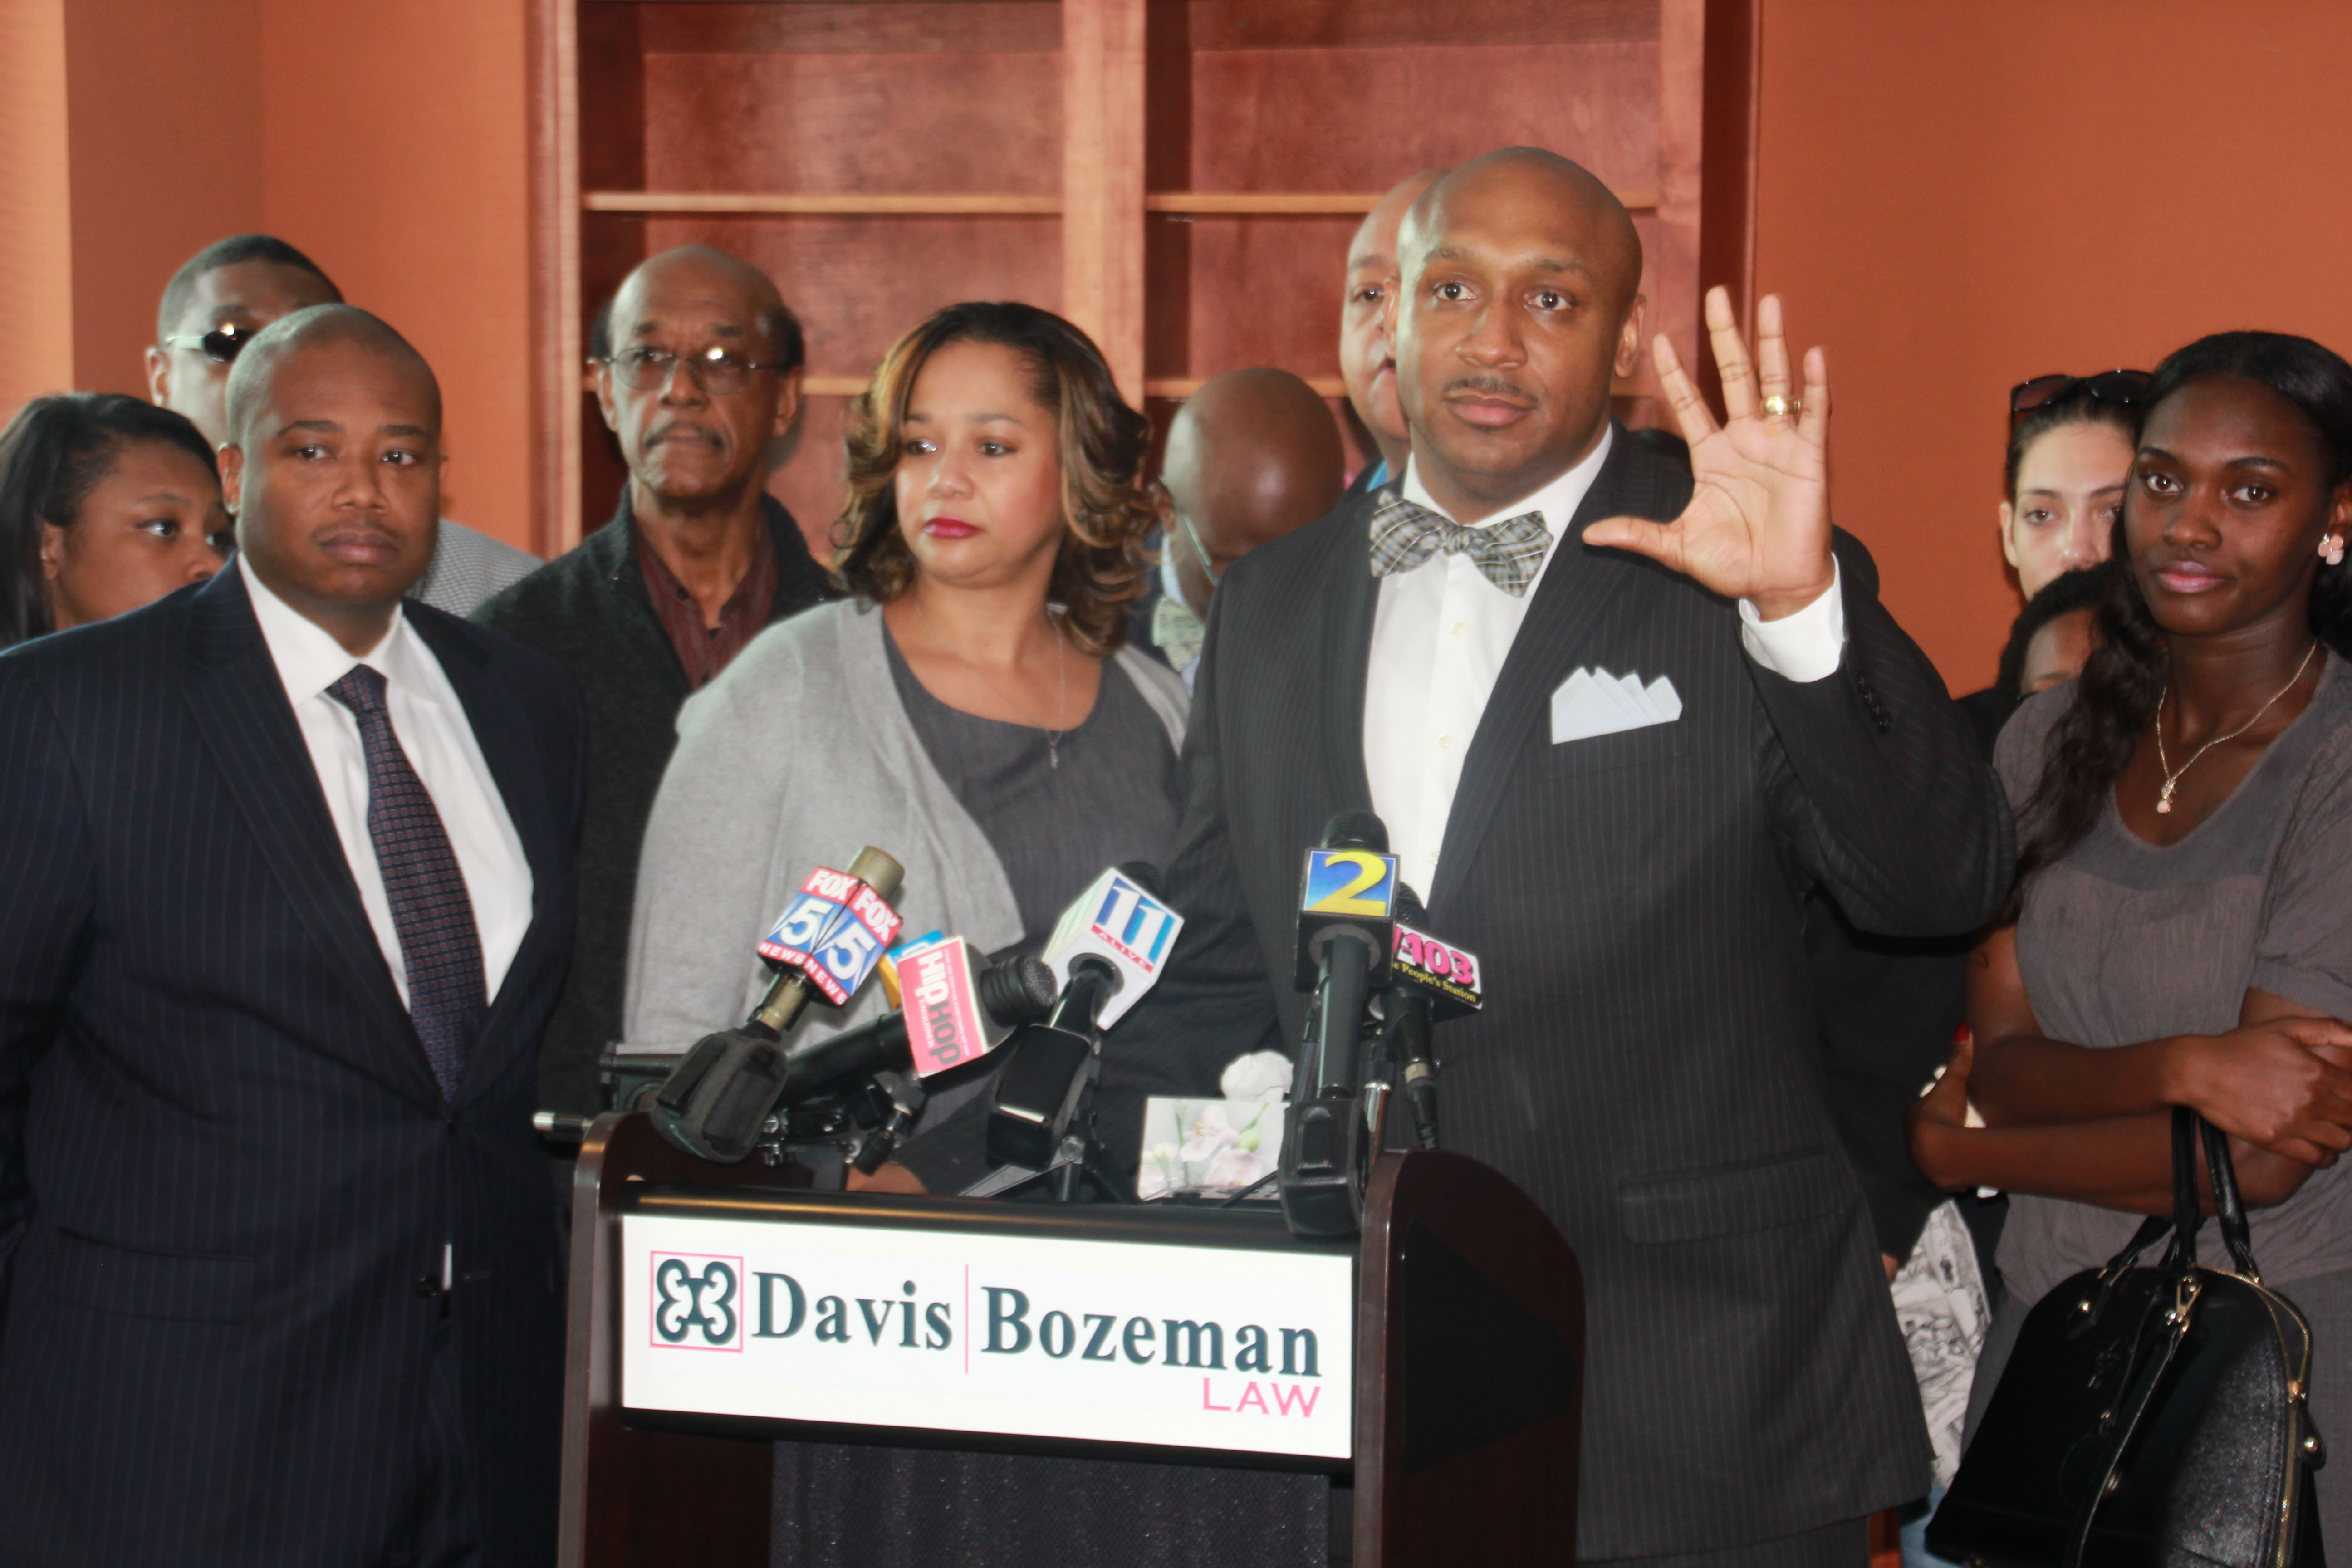 The attorneys for Nicholas Thomas' family, Robert Bozeman, left, and Mawuli Davis (hand raised) question several of the facts that Smyrna police gave to the media as justification for the shooting. 